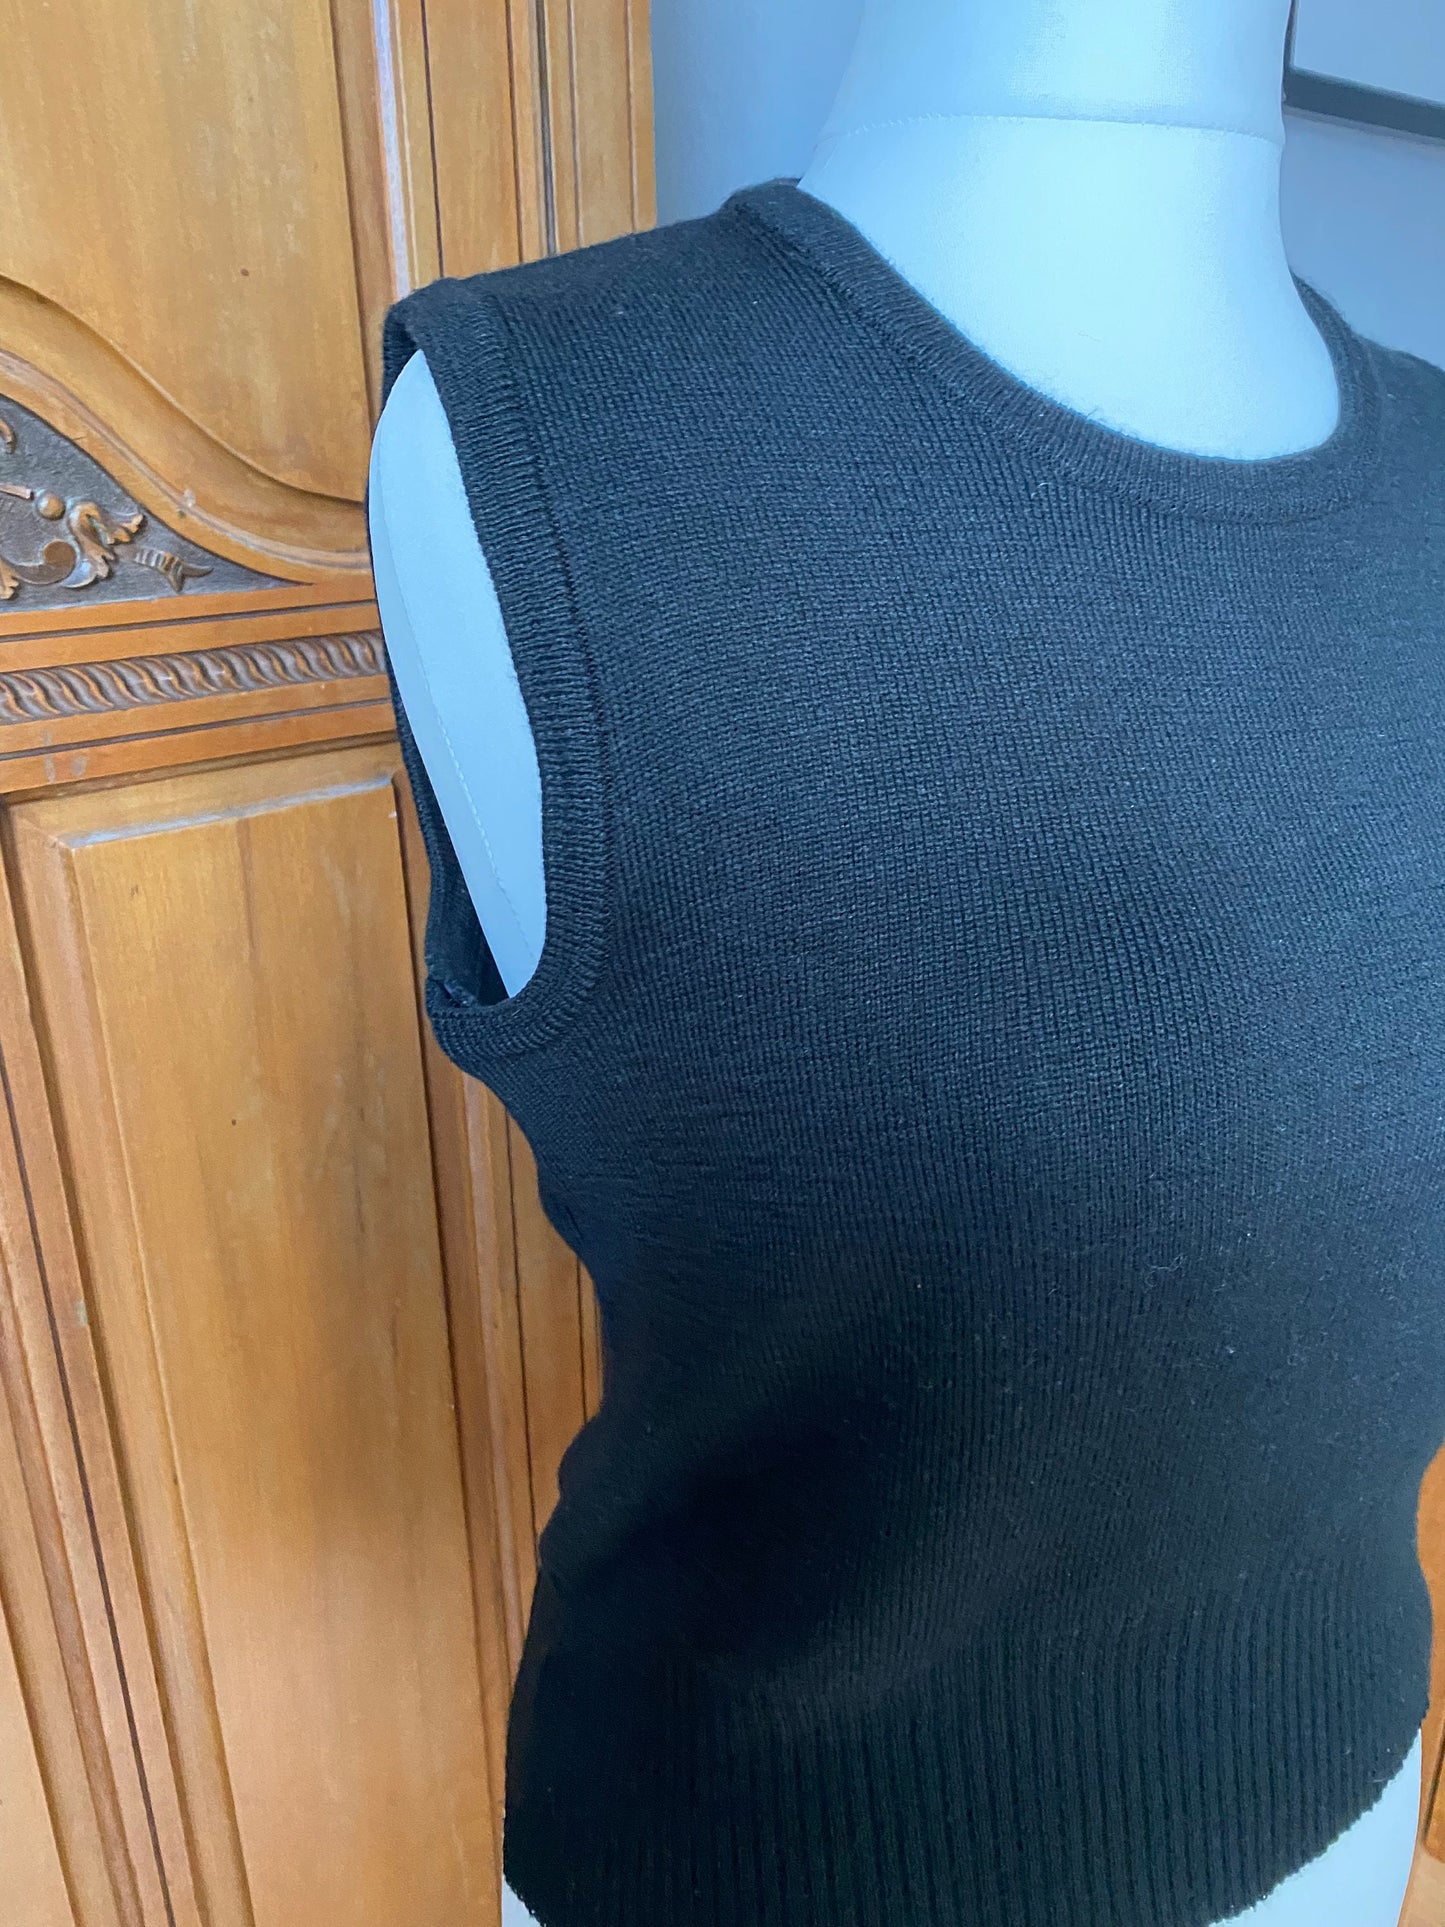 Black 70s round neck tank top. Approx UK size 10-16